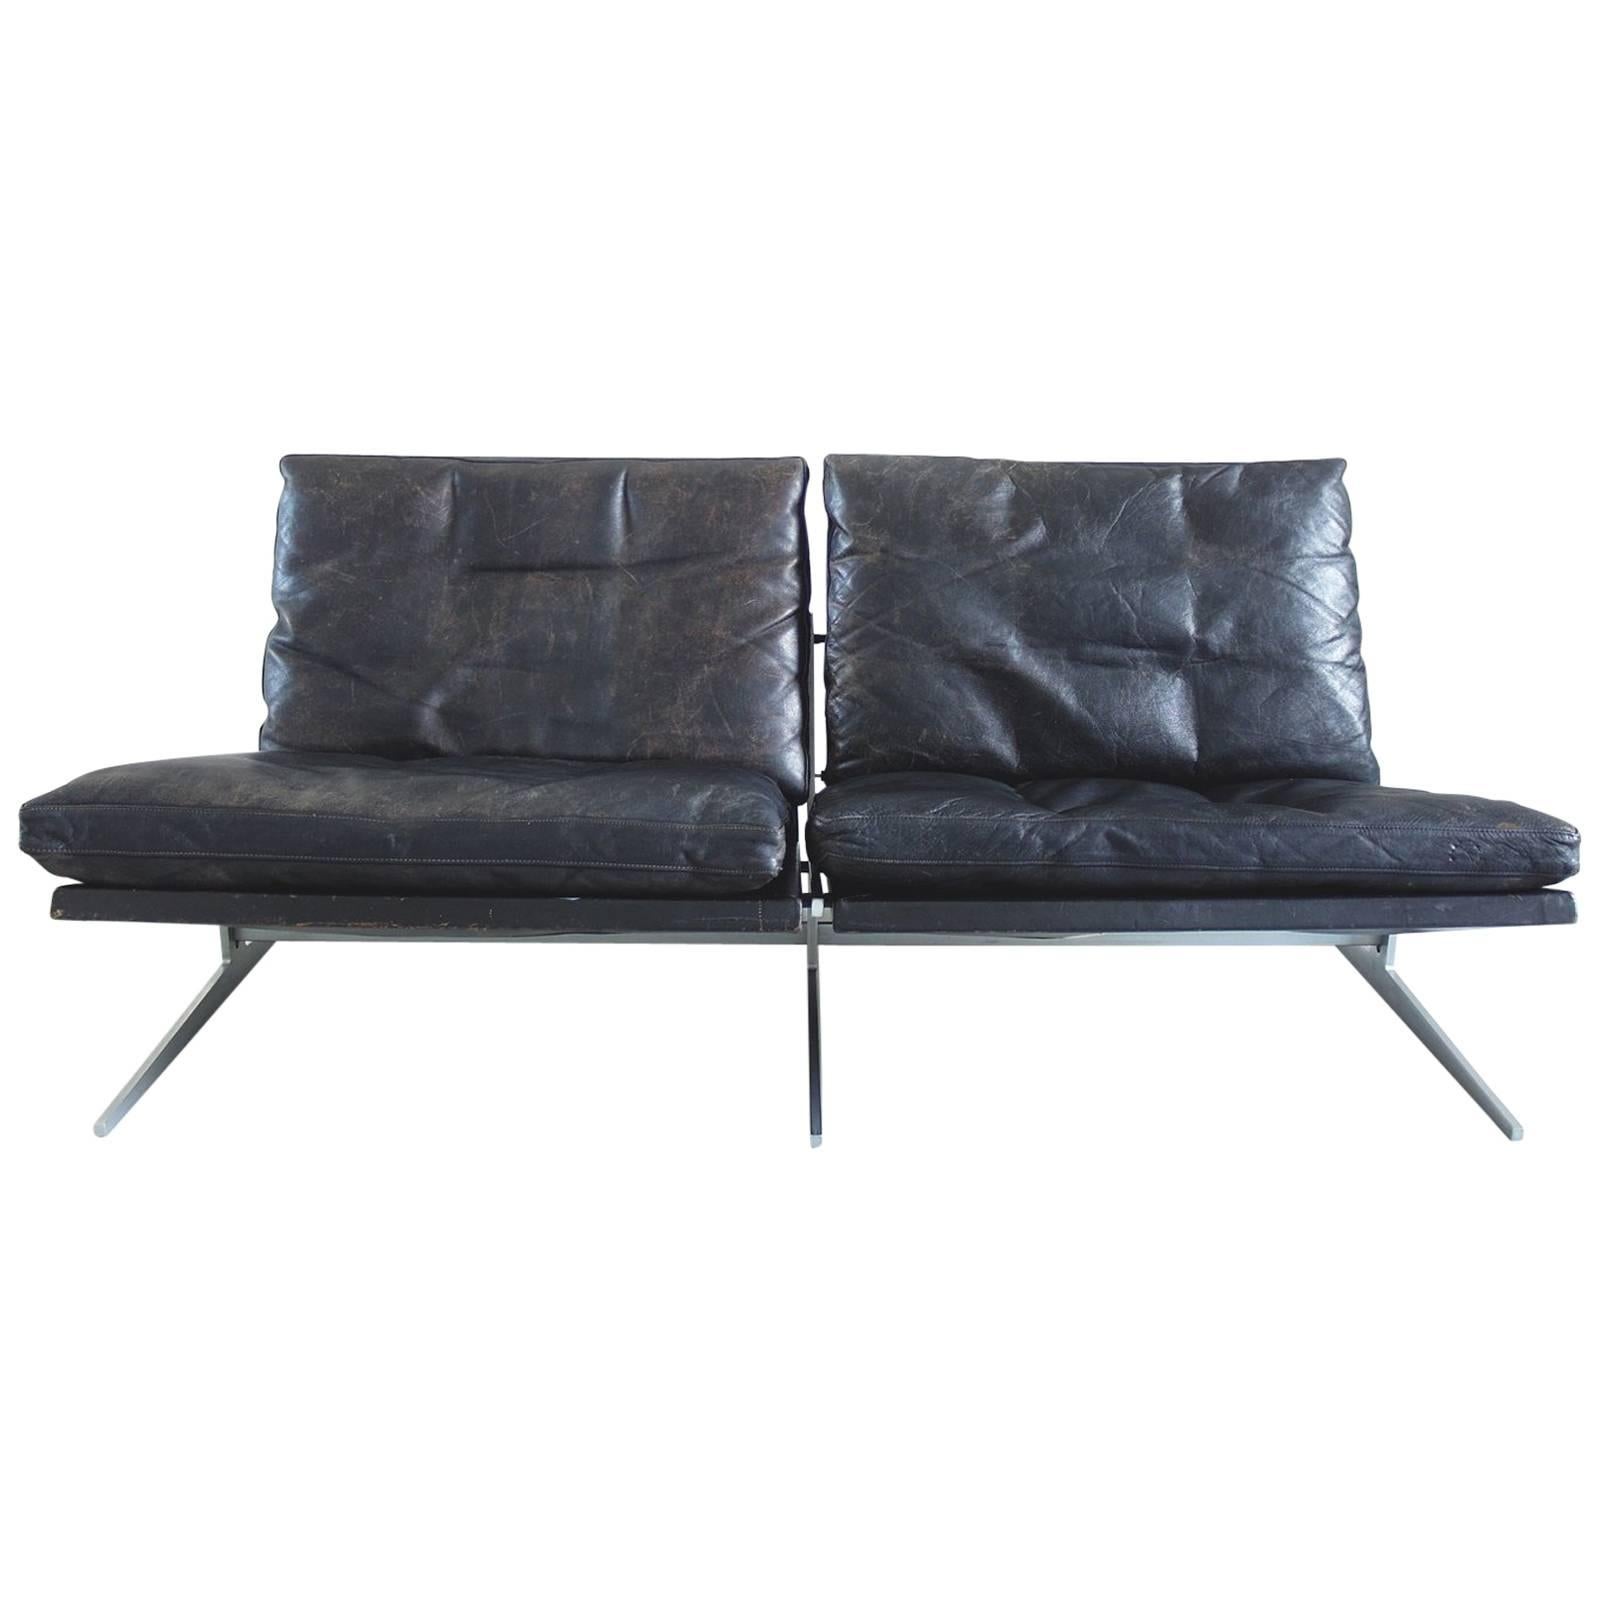 Fabricius and Kastholm Black Leather Two-Seat Sofa for Bo-Ex, Denmark, 1962